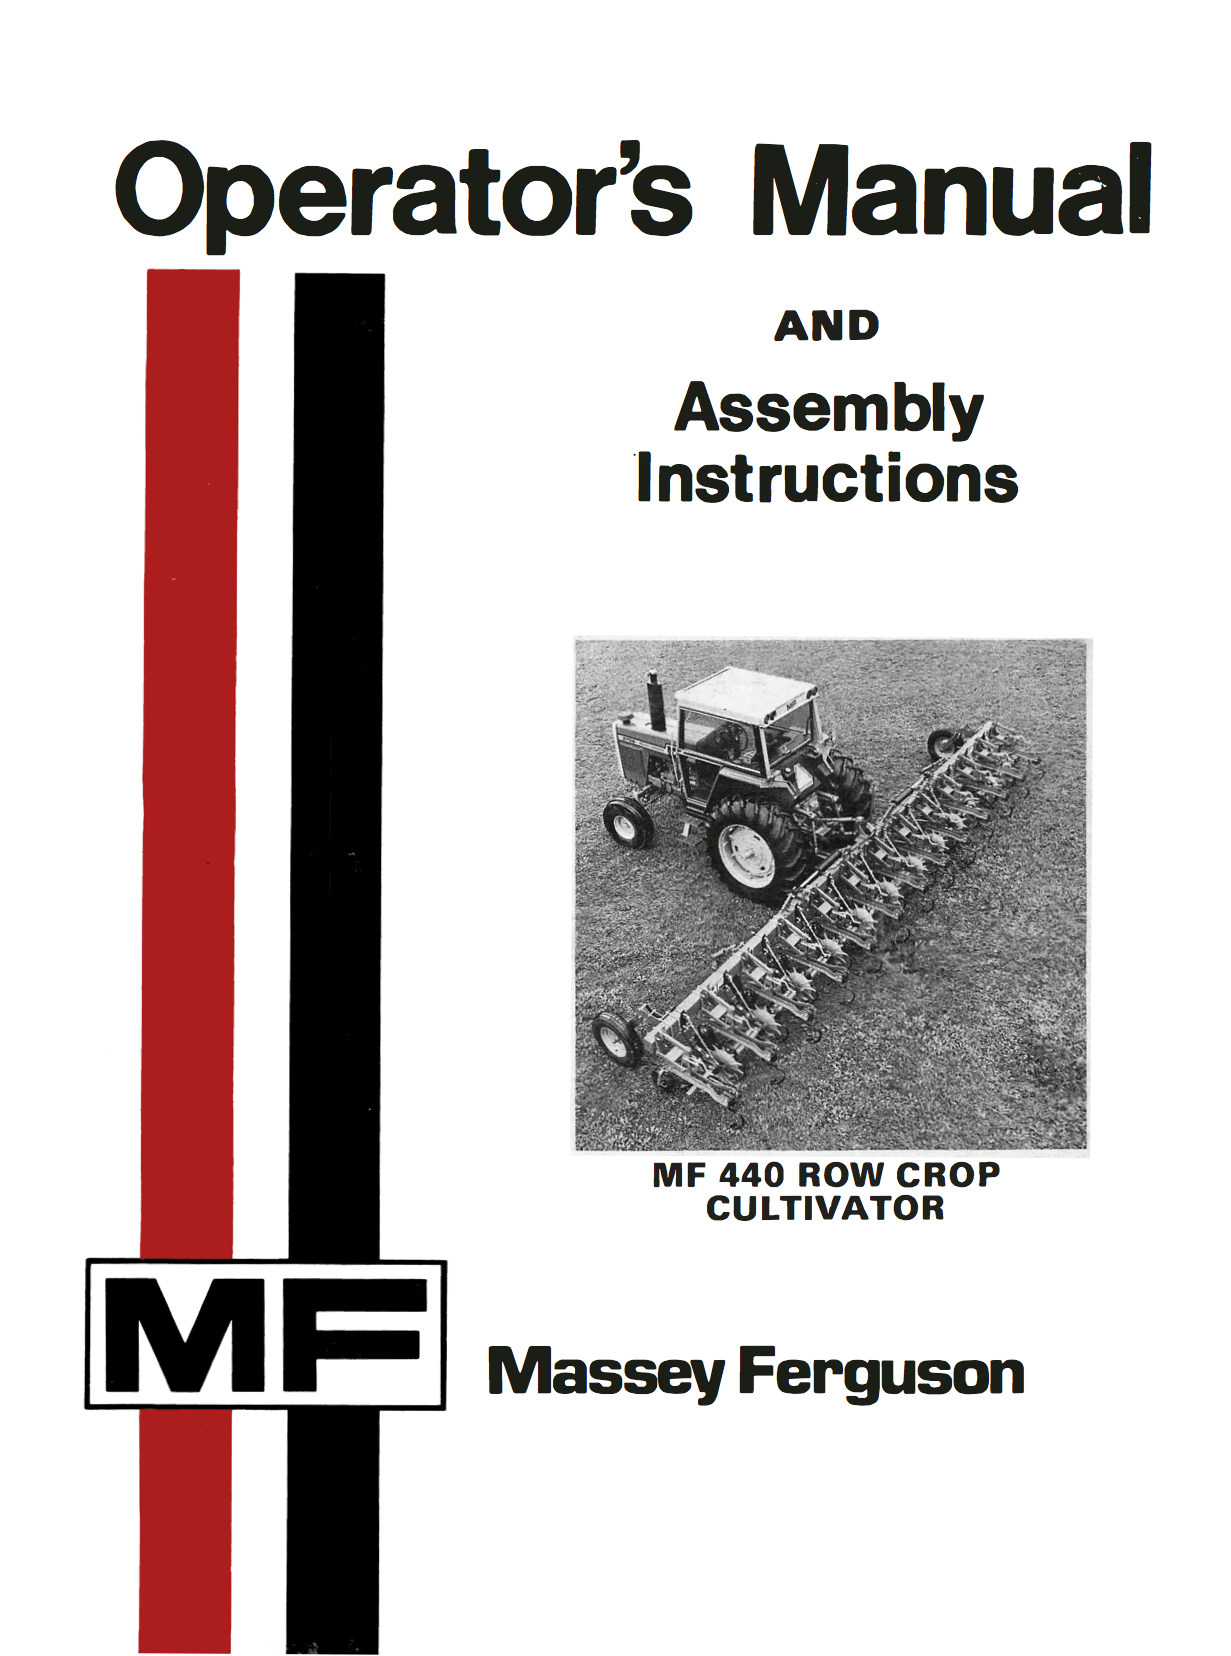 Massey Ferguson MF 440 Row Crop Cultivator - Operator's Manual and Assembly Instructions - Ag Manuals - A Provider of Digital Farm Manuals - 1